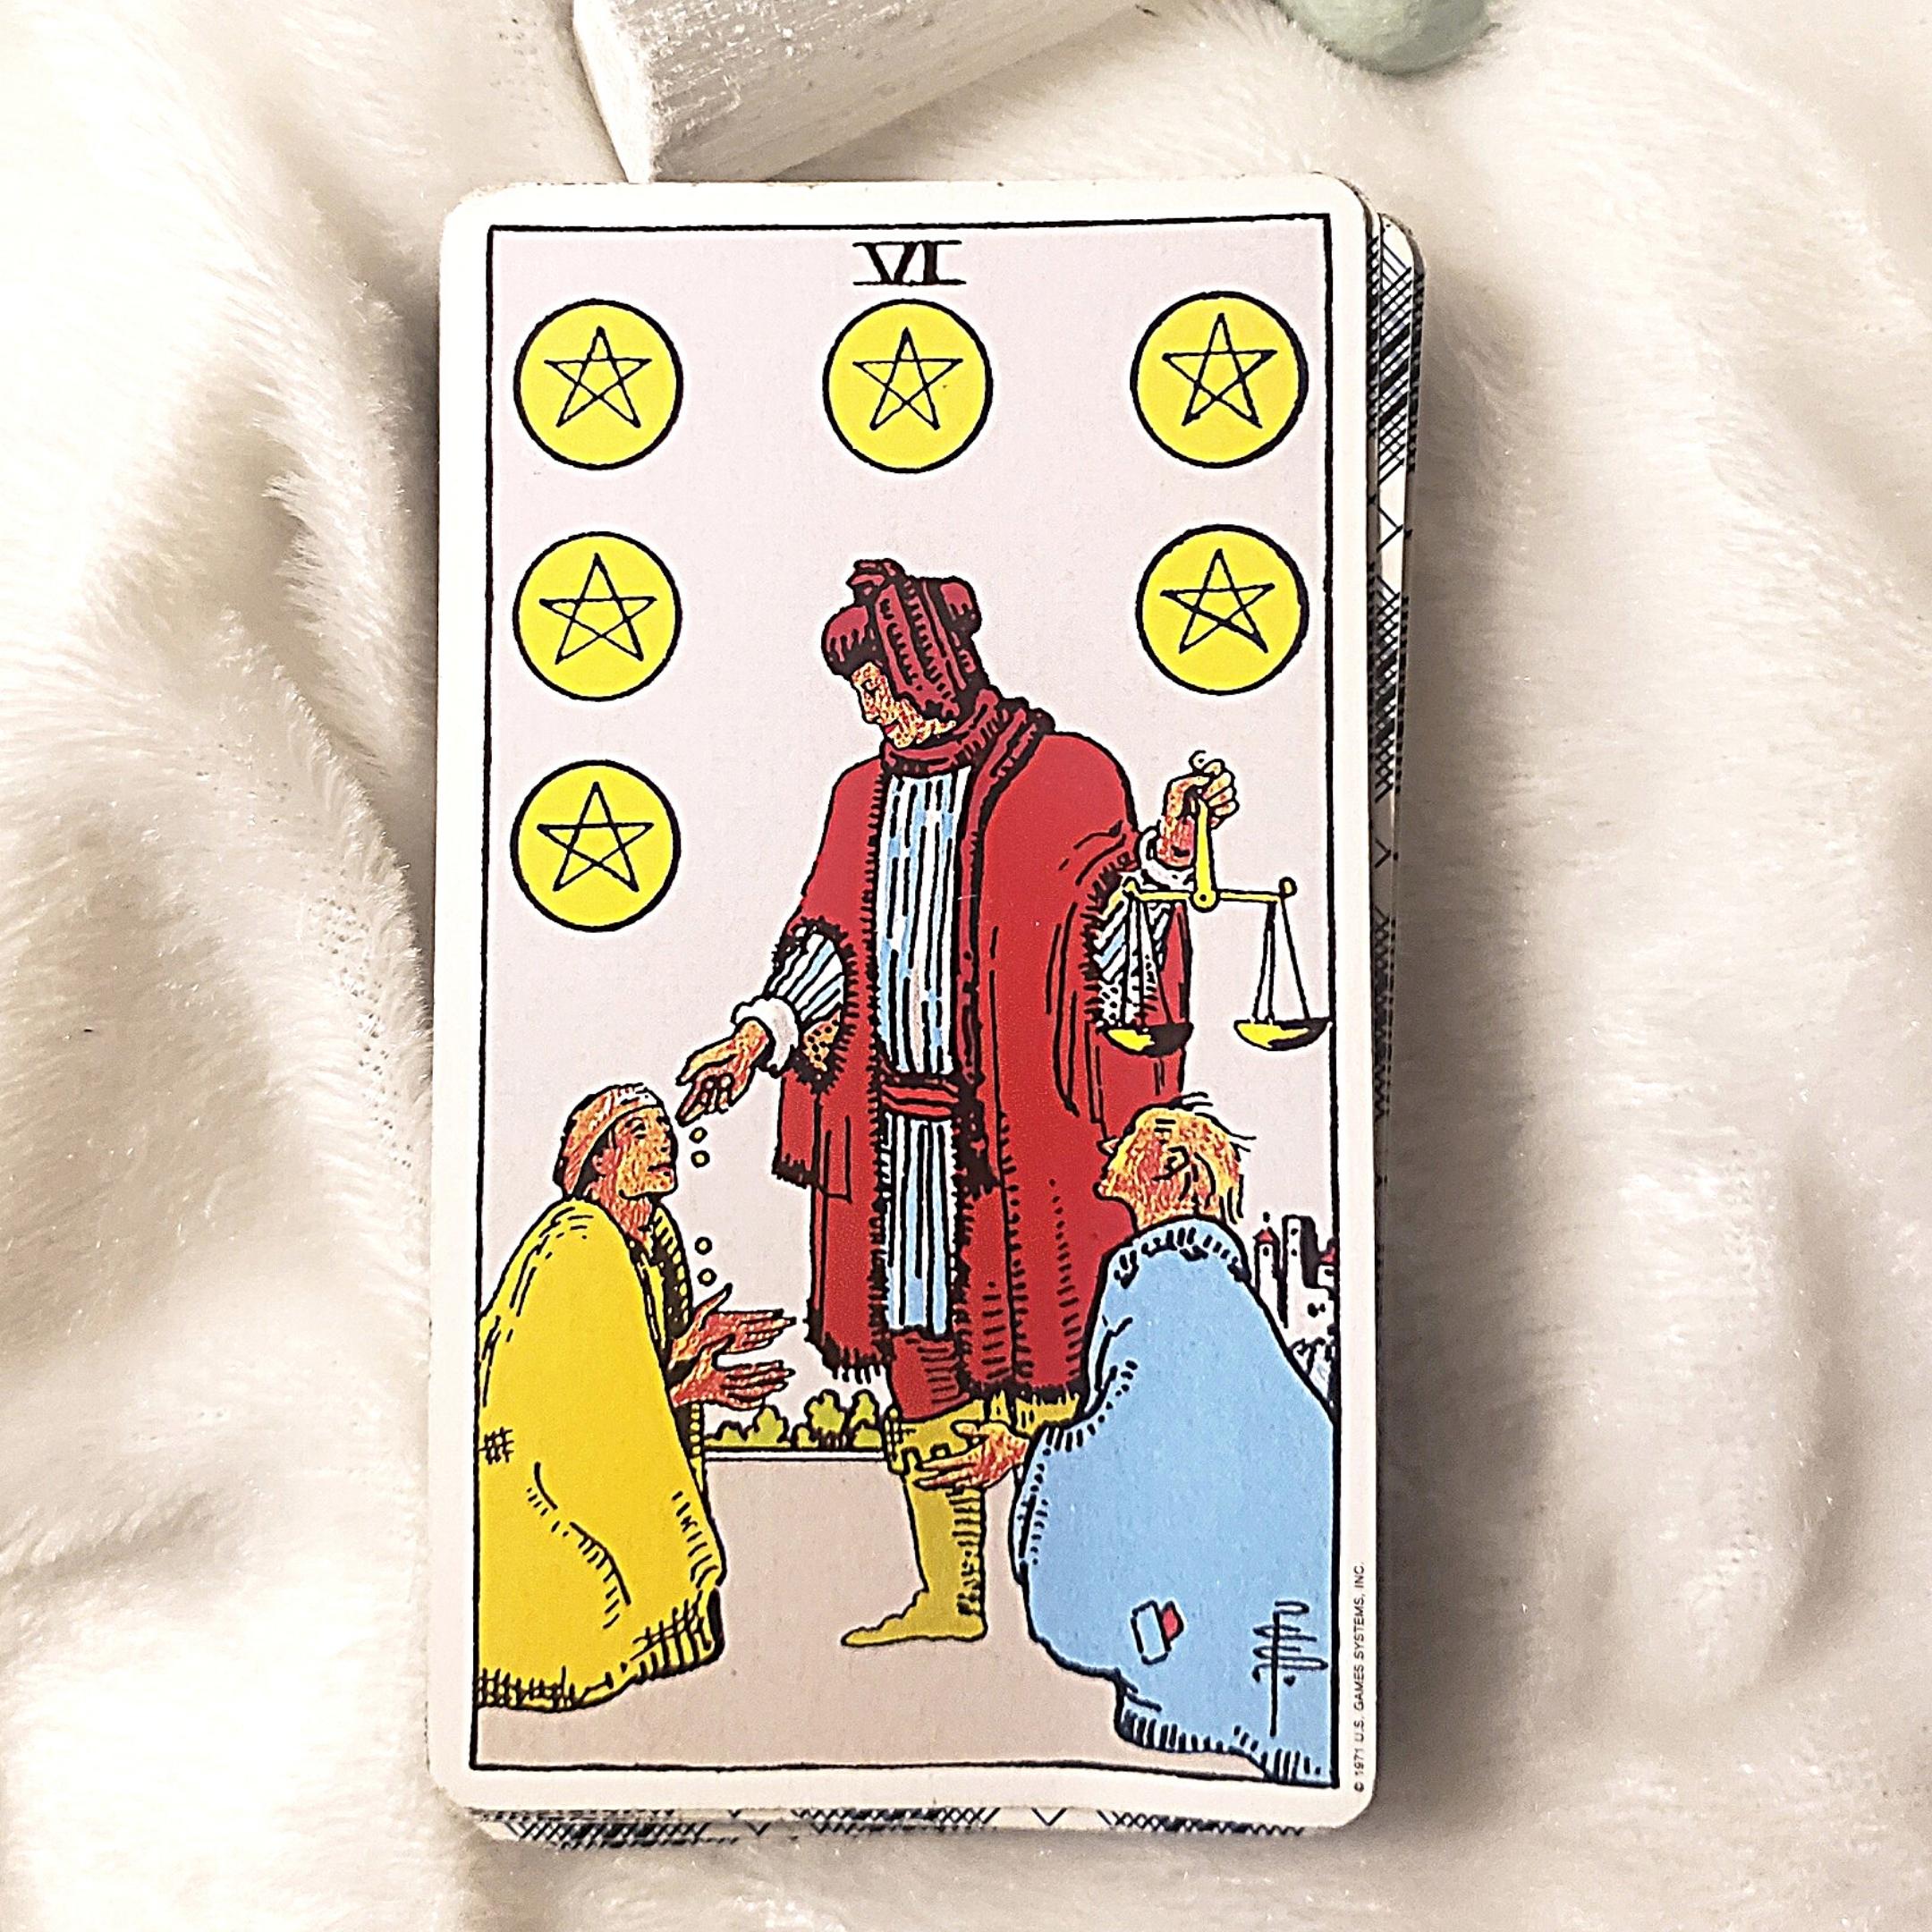 6 of pentacles